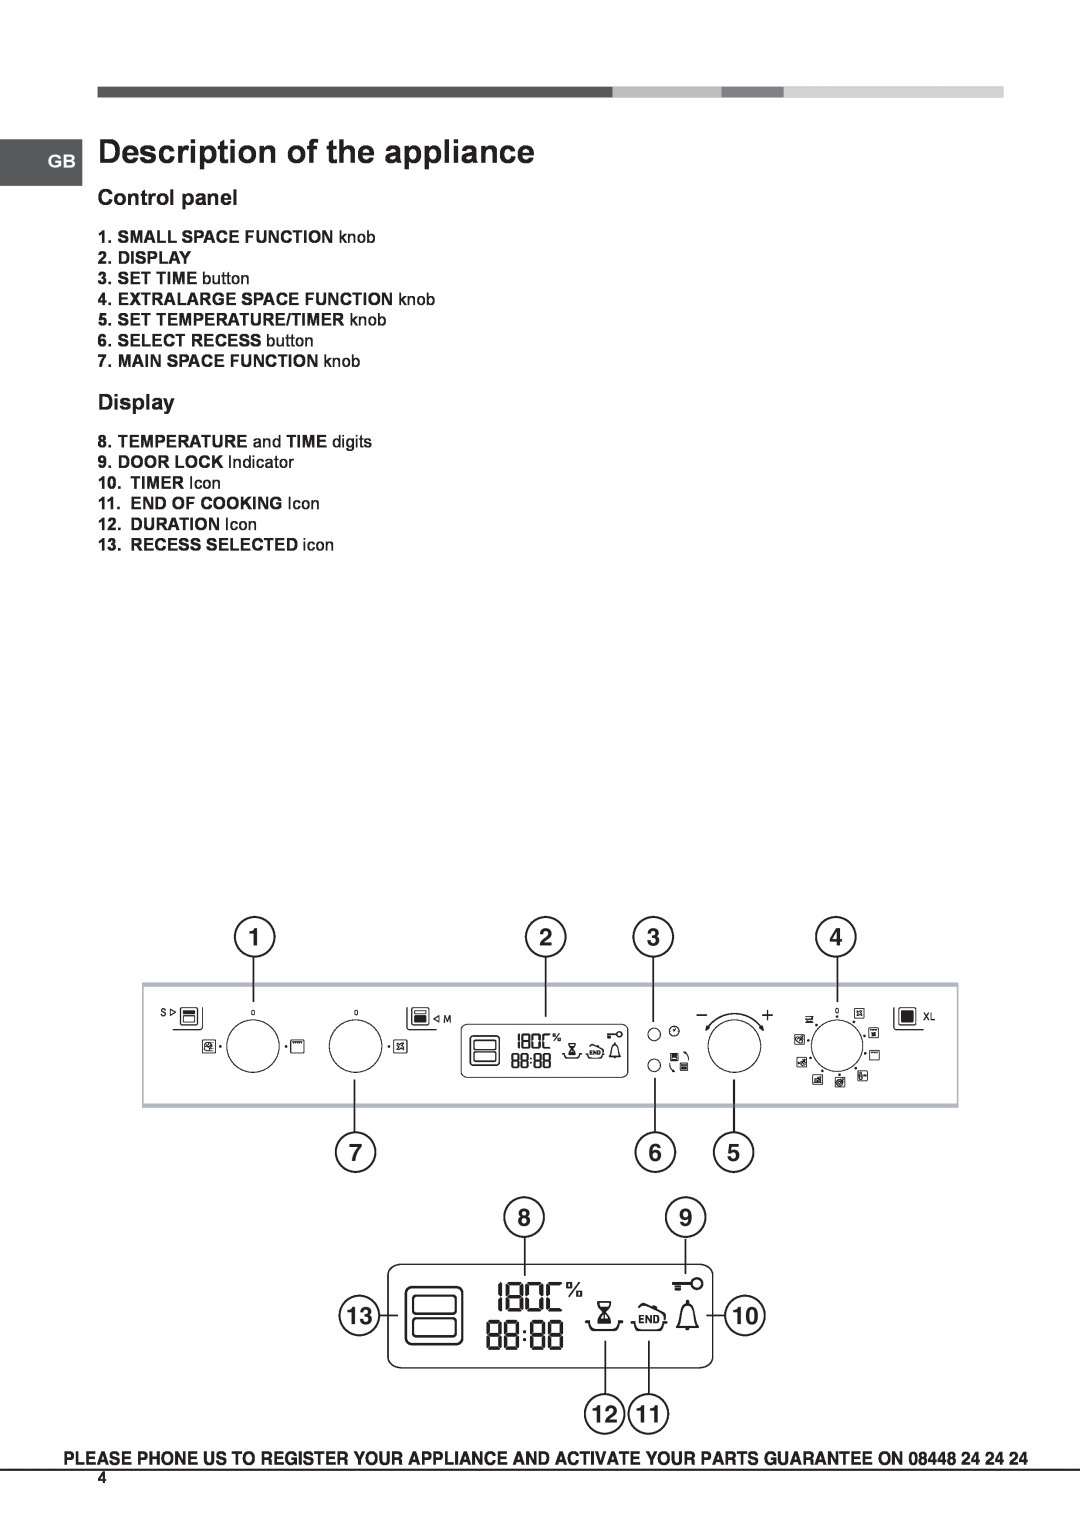 Hotpoint OS 897D P IX /HP S, OS 897D P /HP S manual GB Description of the appliance, ¡ Oc 